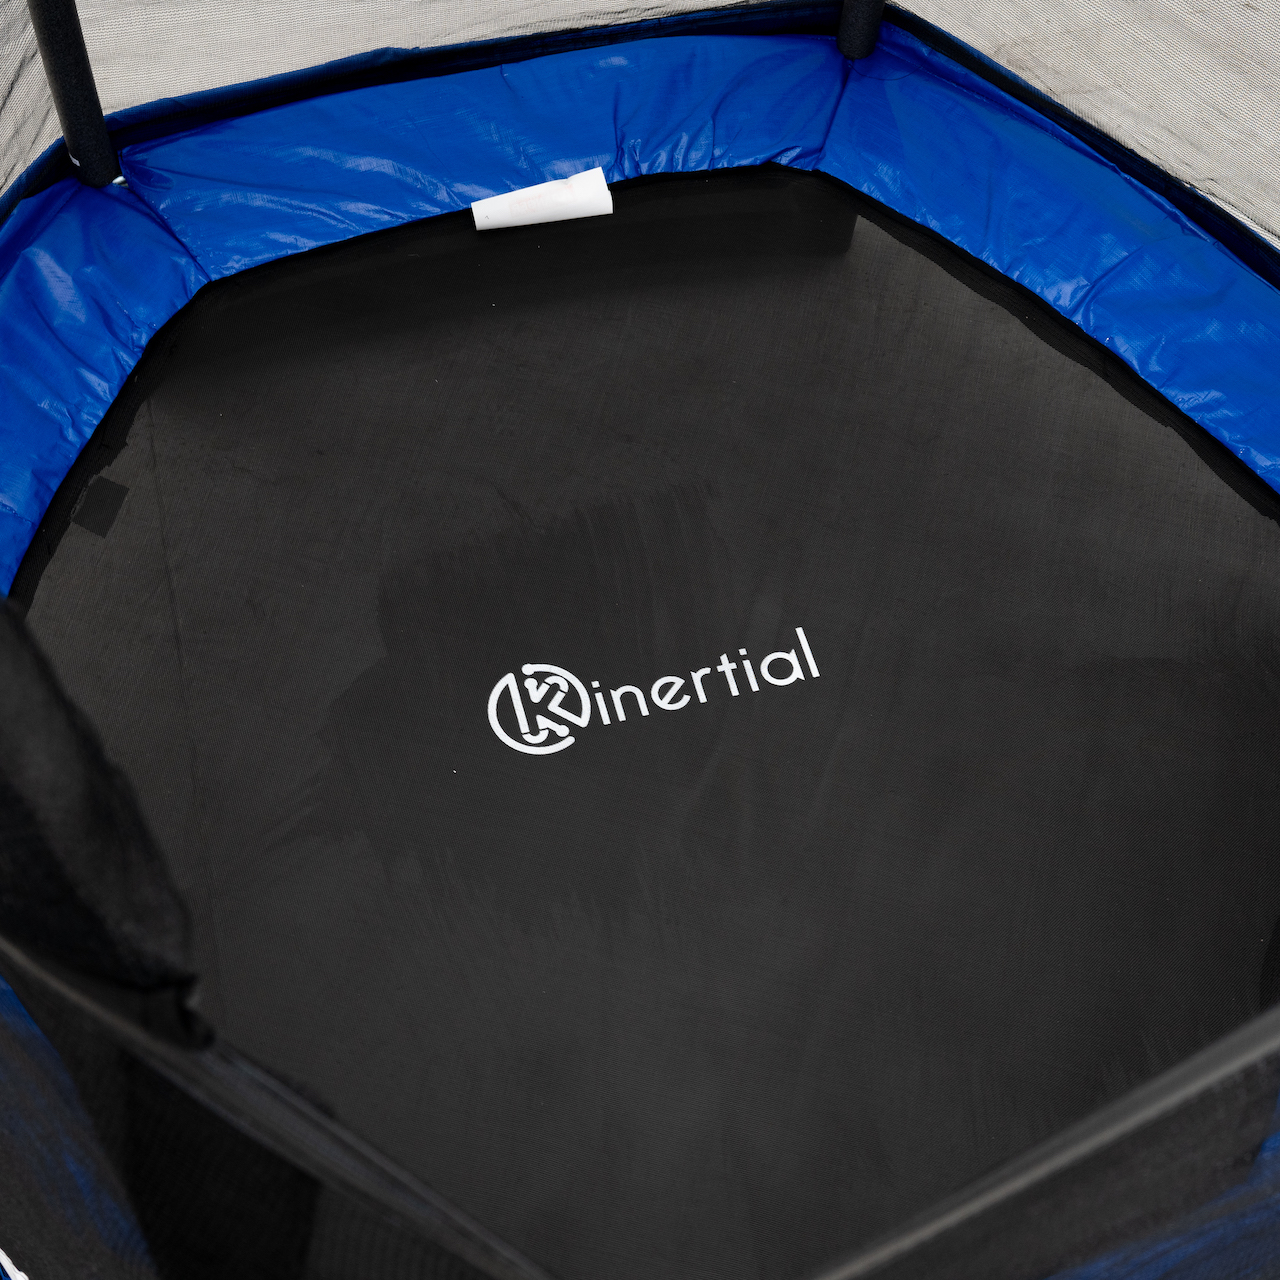 Kinertial 7 ft Hexagonal Kids Trampoline with Safety Enclosure Net (Ages 3 - 10) - image 5 of 9